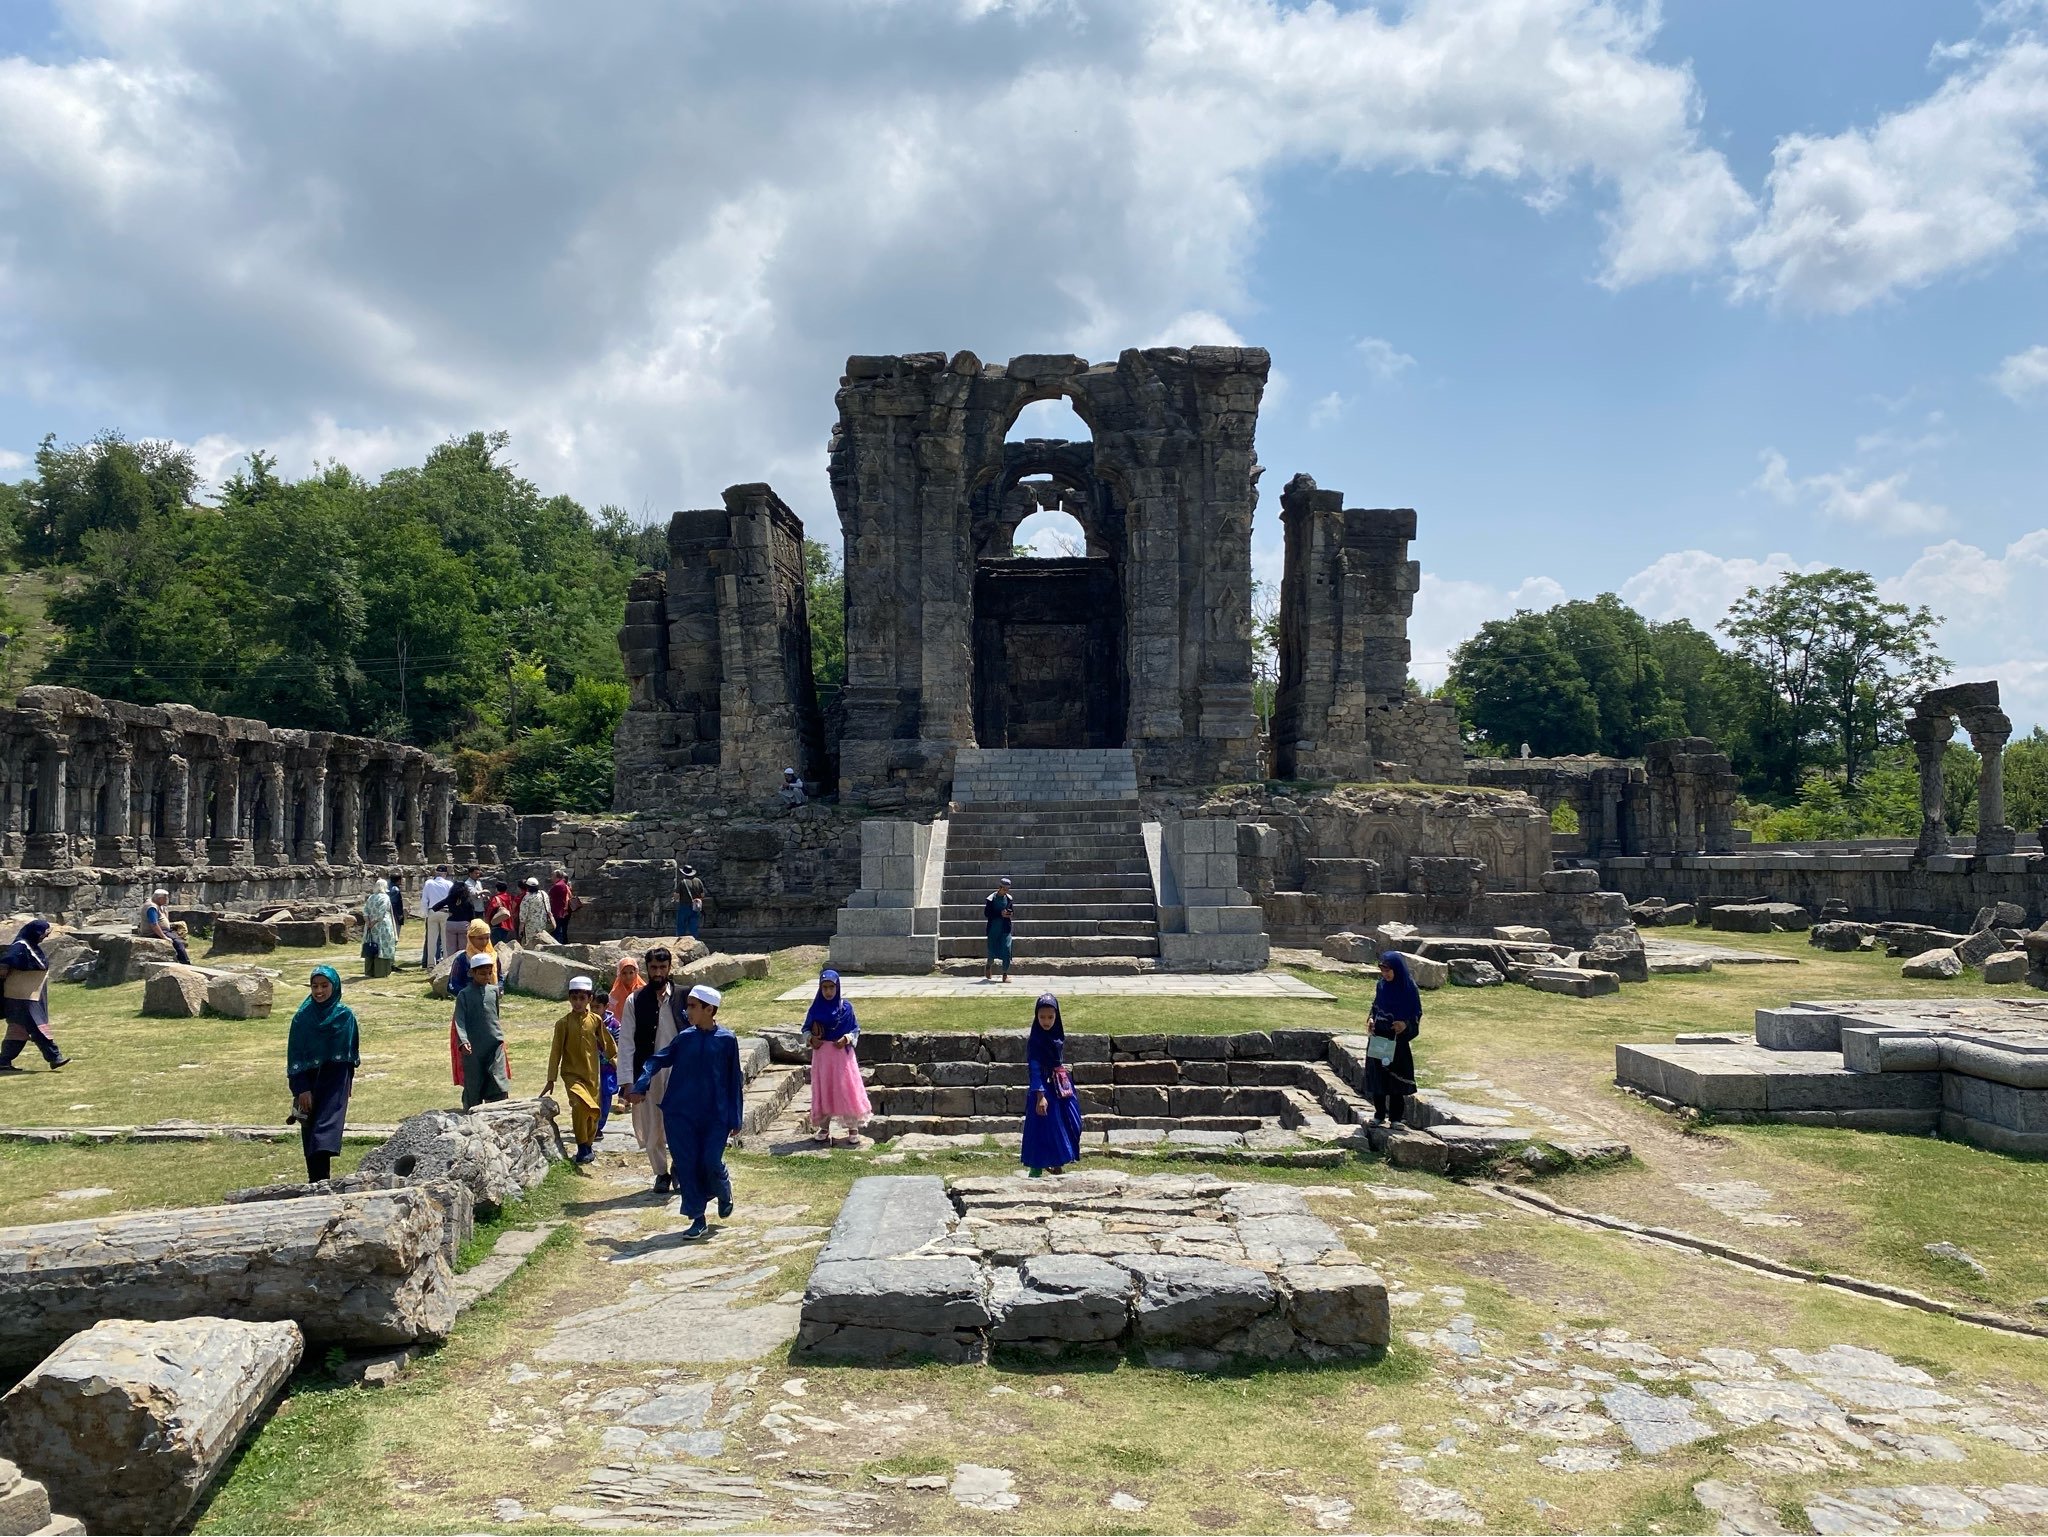 Greek inspired 1200 years old temple in Kashmir known as Martand temple.